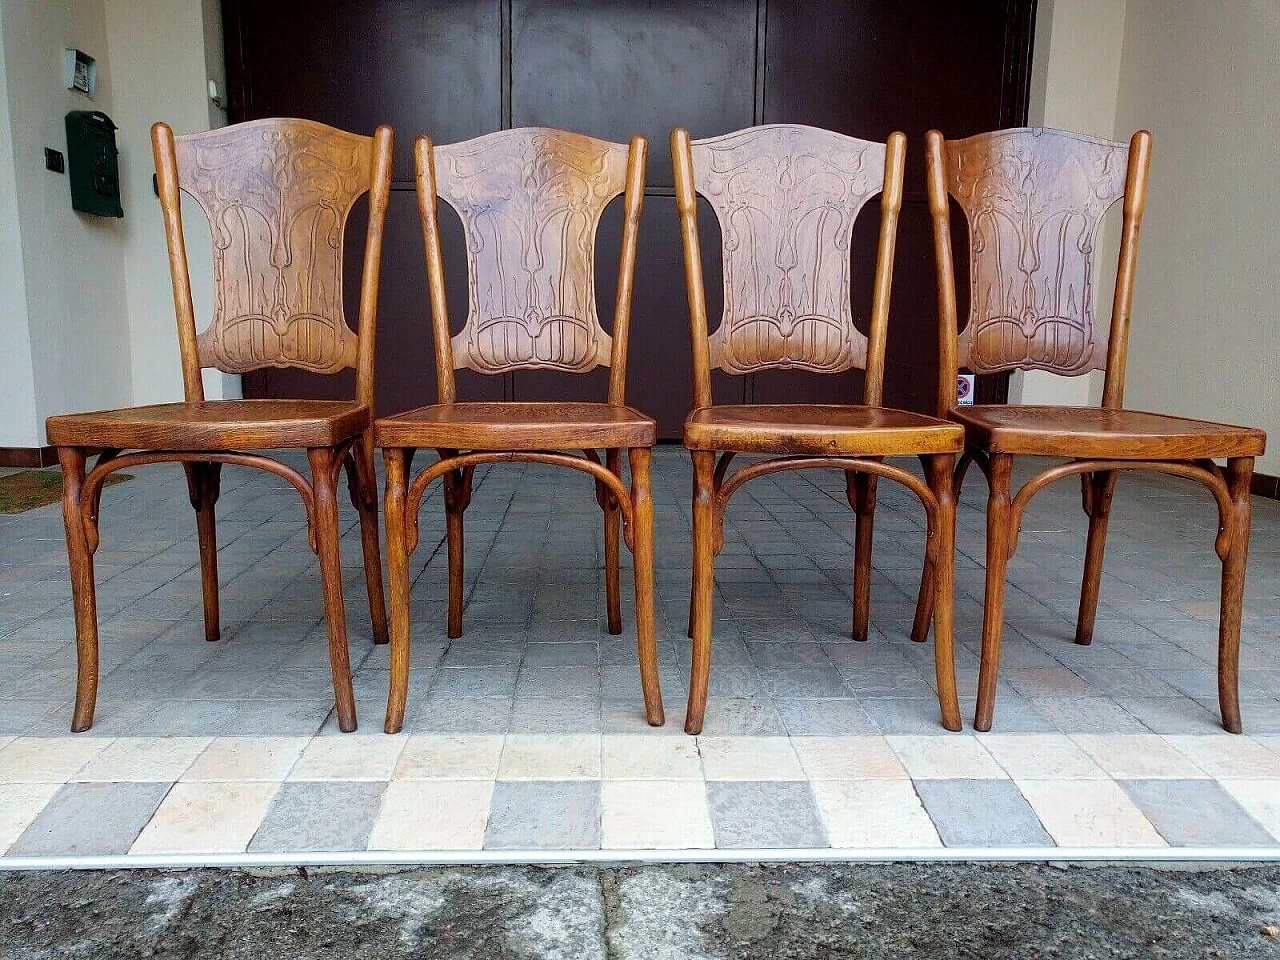 4 Wooden chairs by Jacob and Joseph Kohn, early 20th century 1